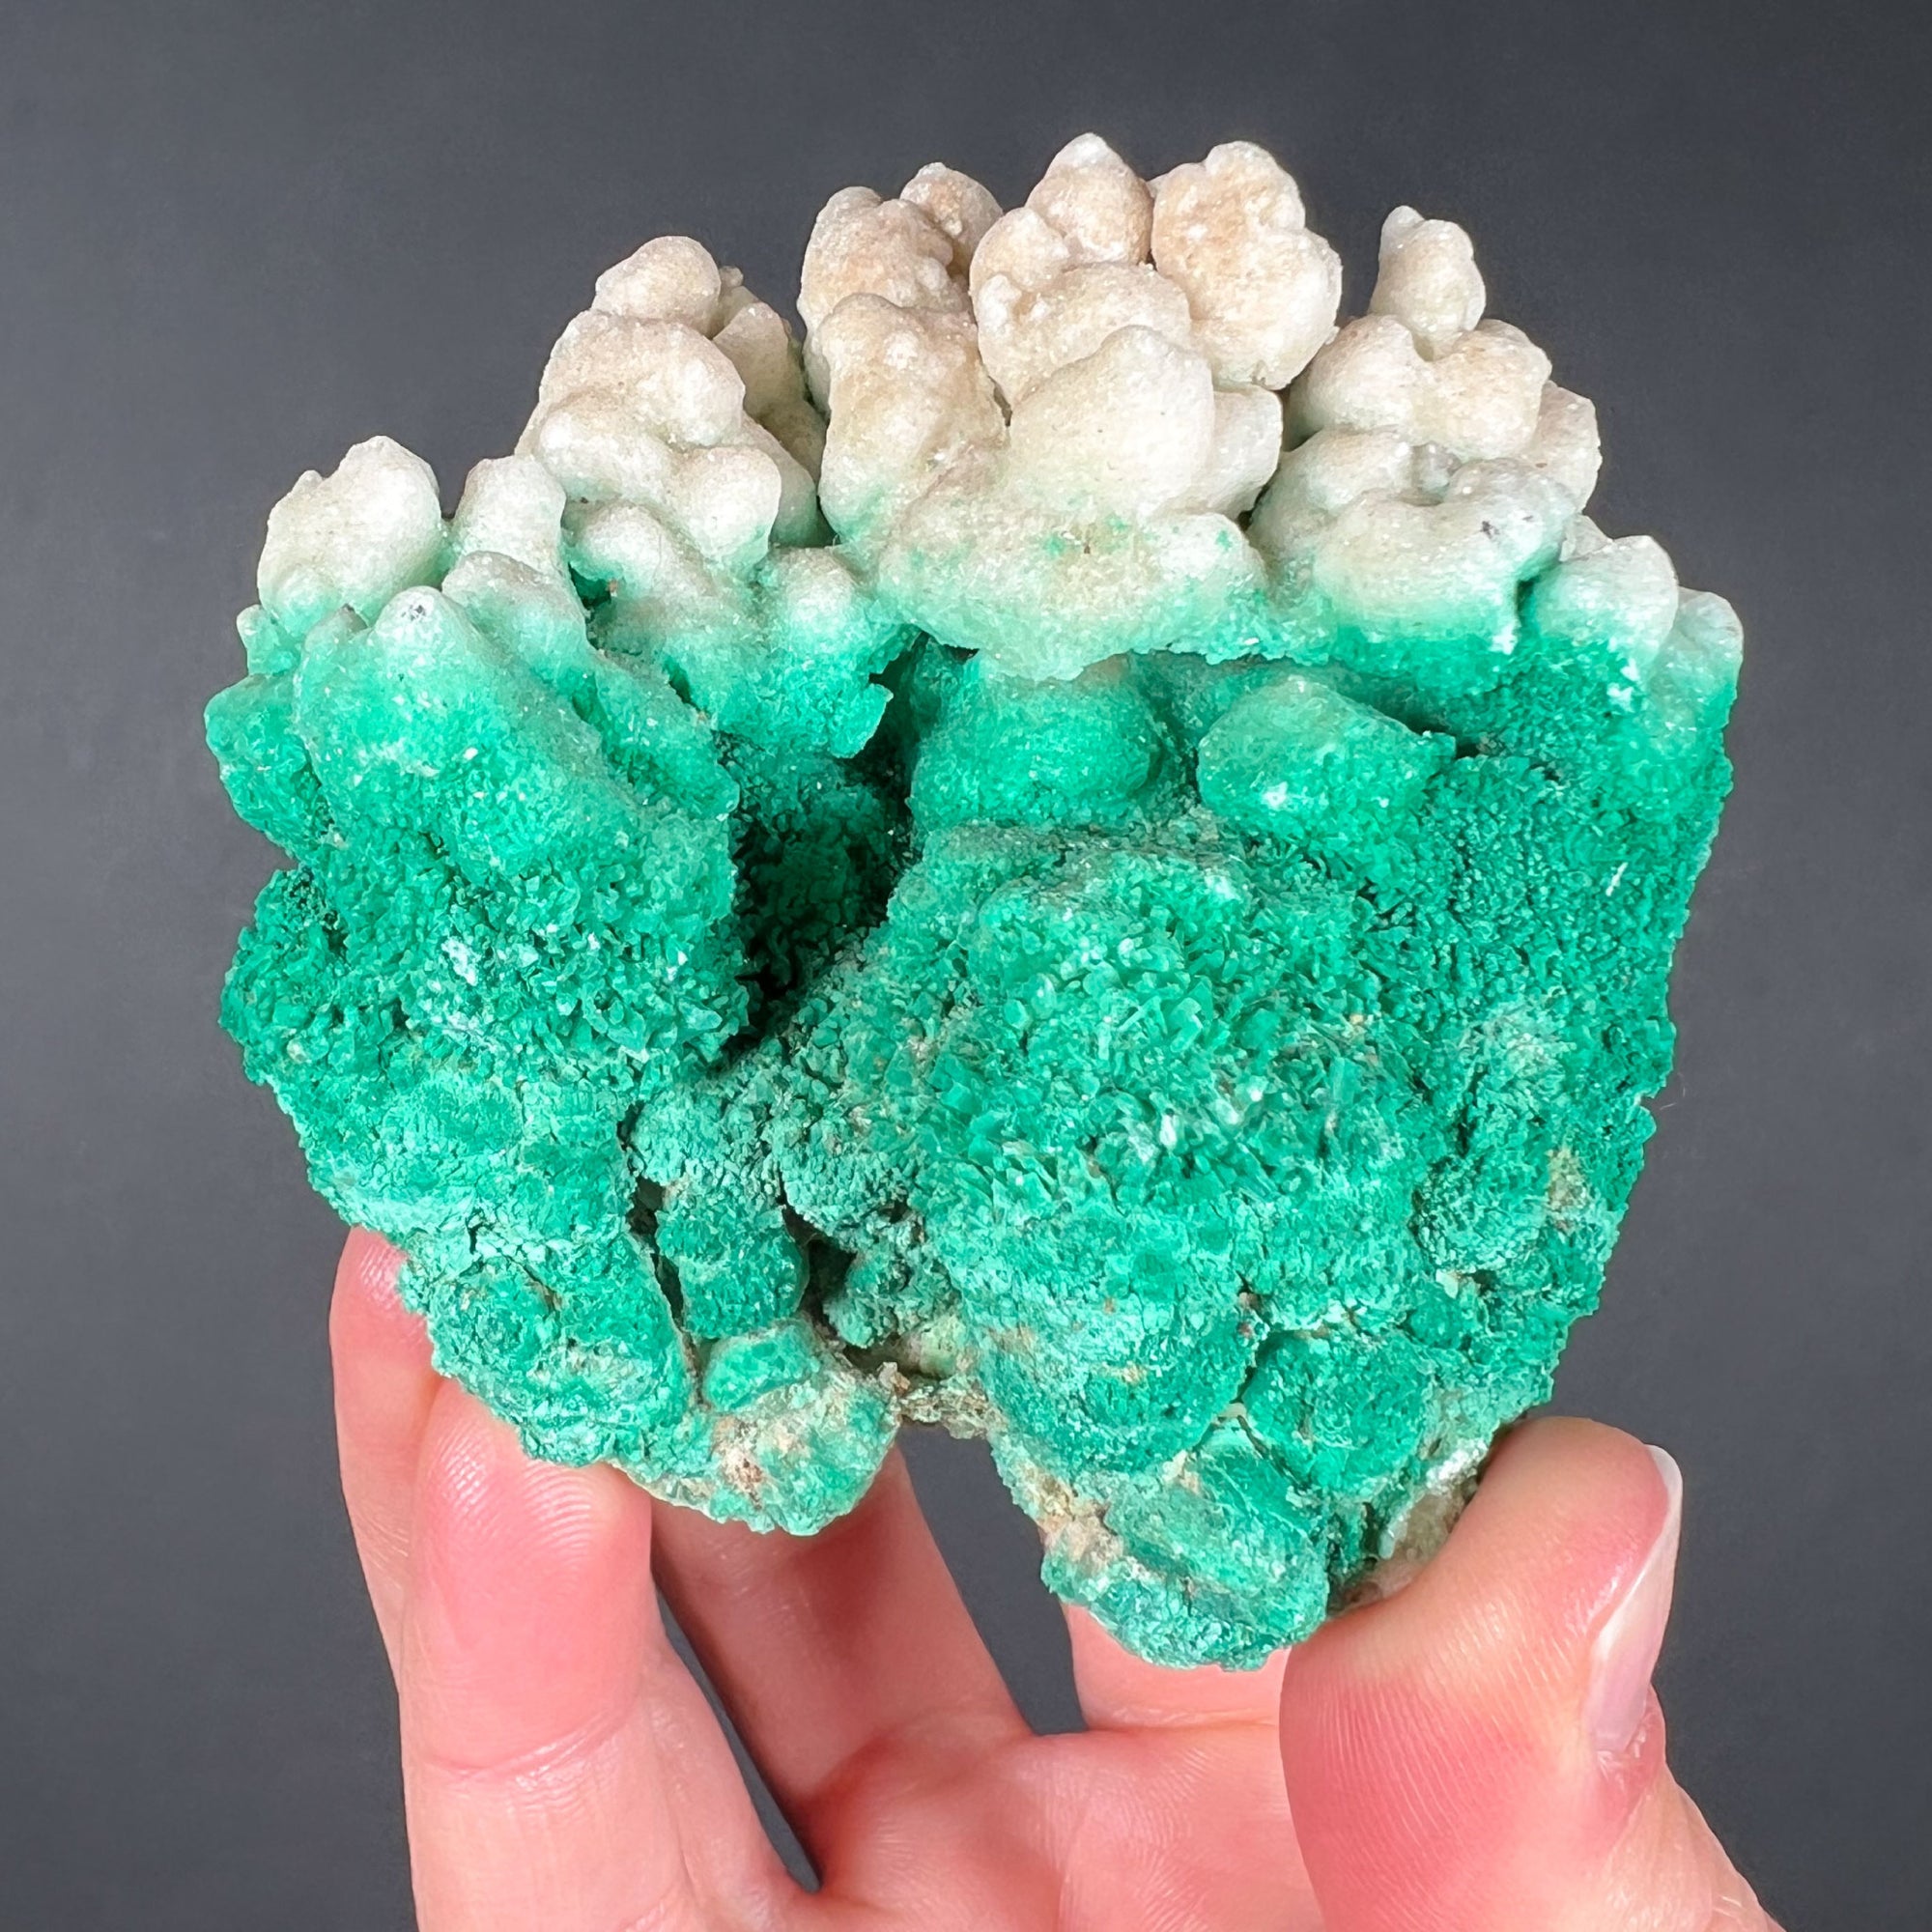 Green and White Crystals of Selenite Gypsum